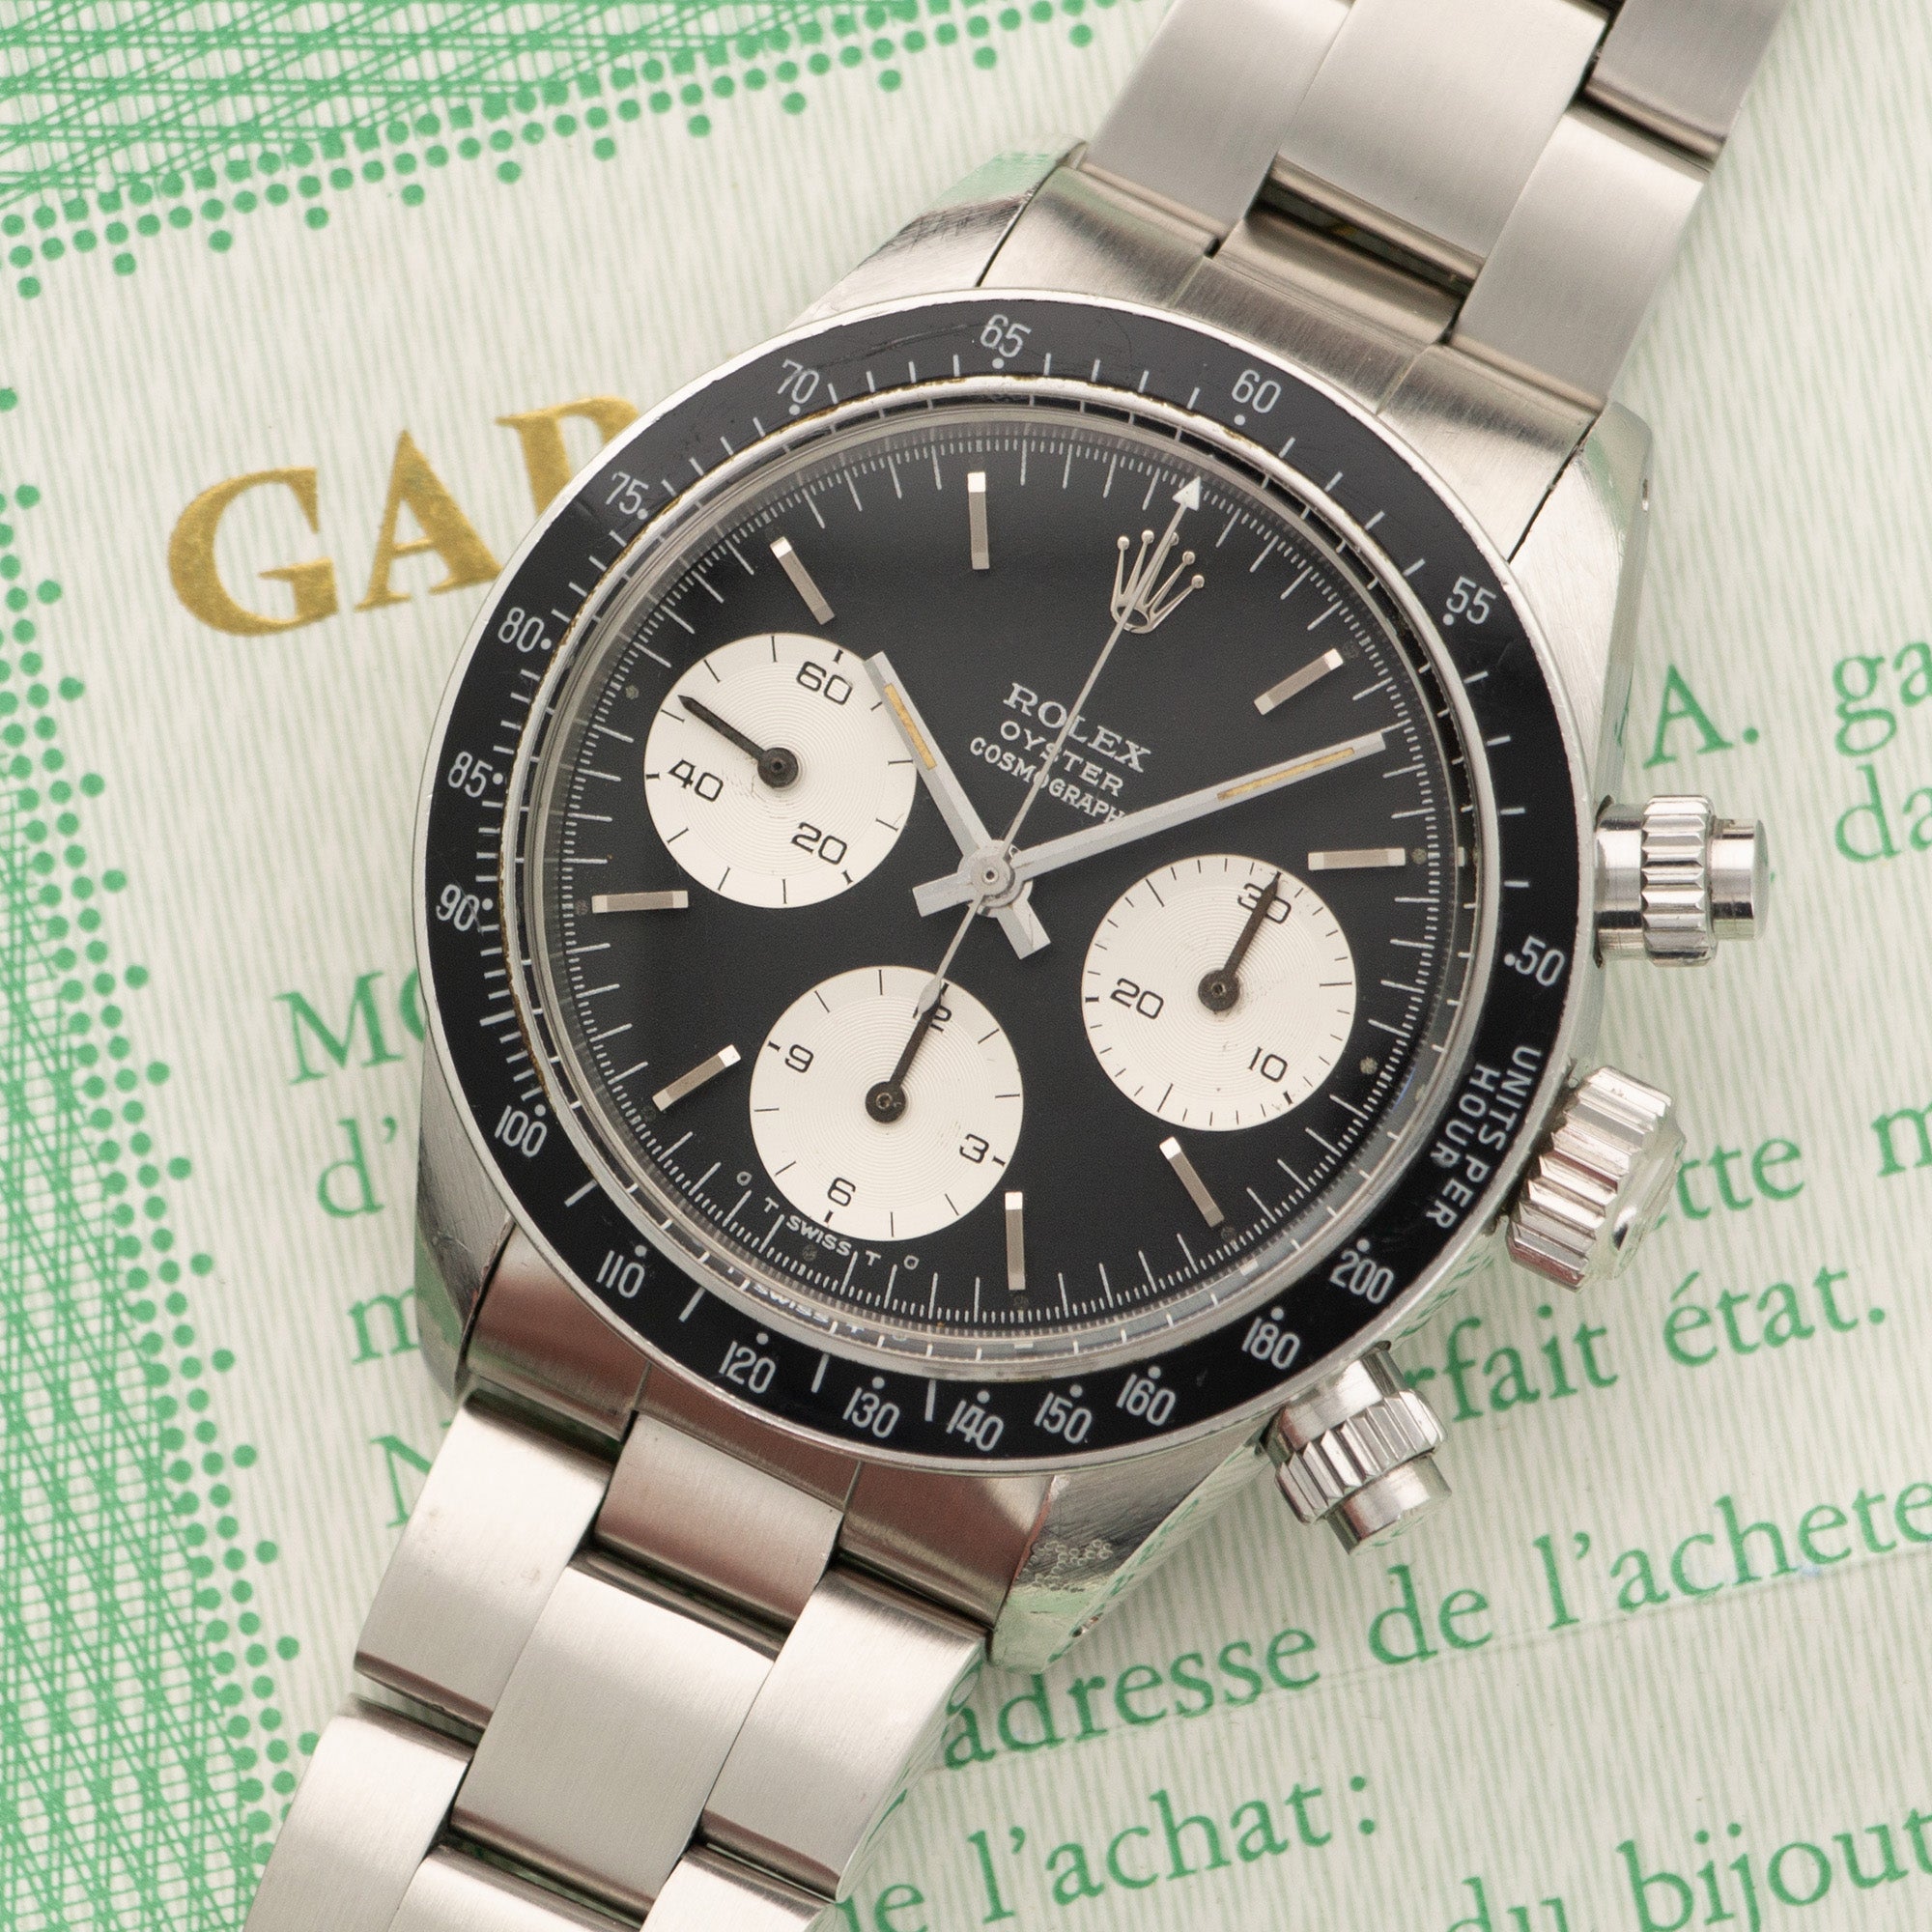 Rolex - Rolex Cosmograph Daytona Watch Ref. 6263 with Military History, Sigma Dial and Original Warranty and Hangtag - The Keystone Watches